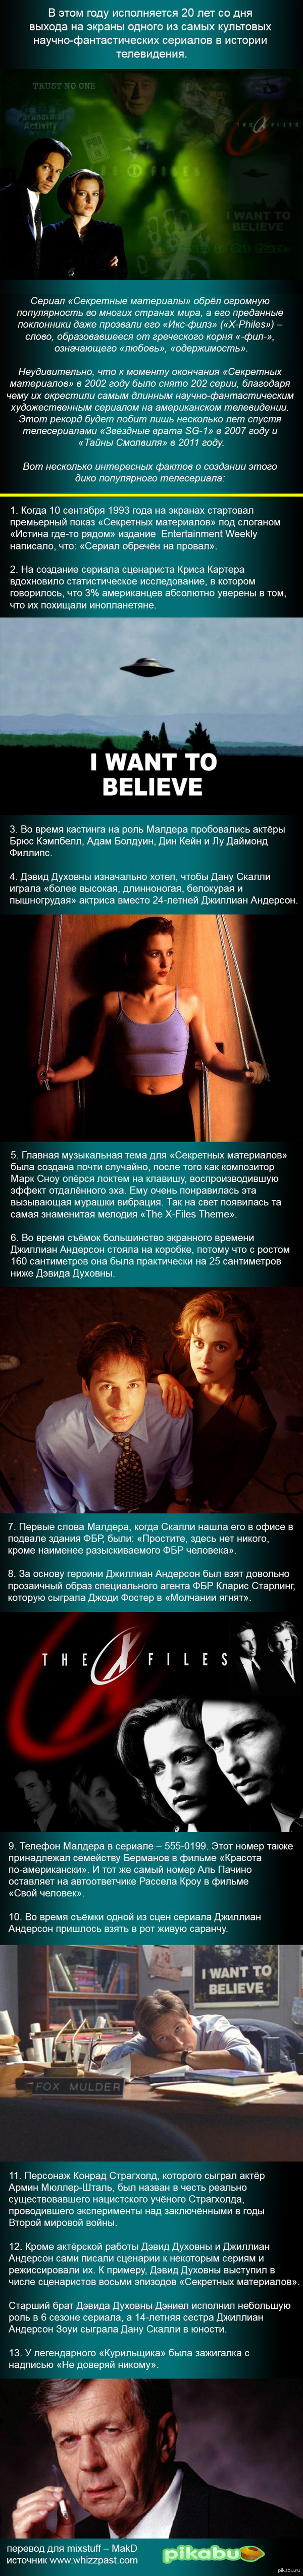 Secret facts about the series The X-Files - Longpost, x-Files, Serials, Facts, Secret materials